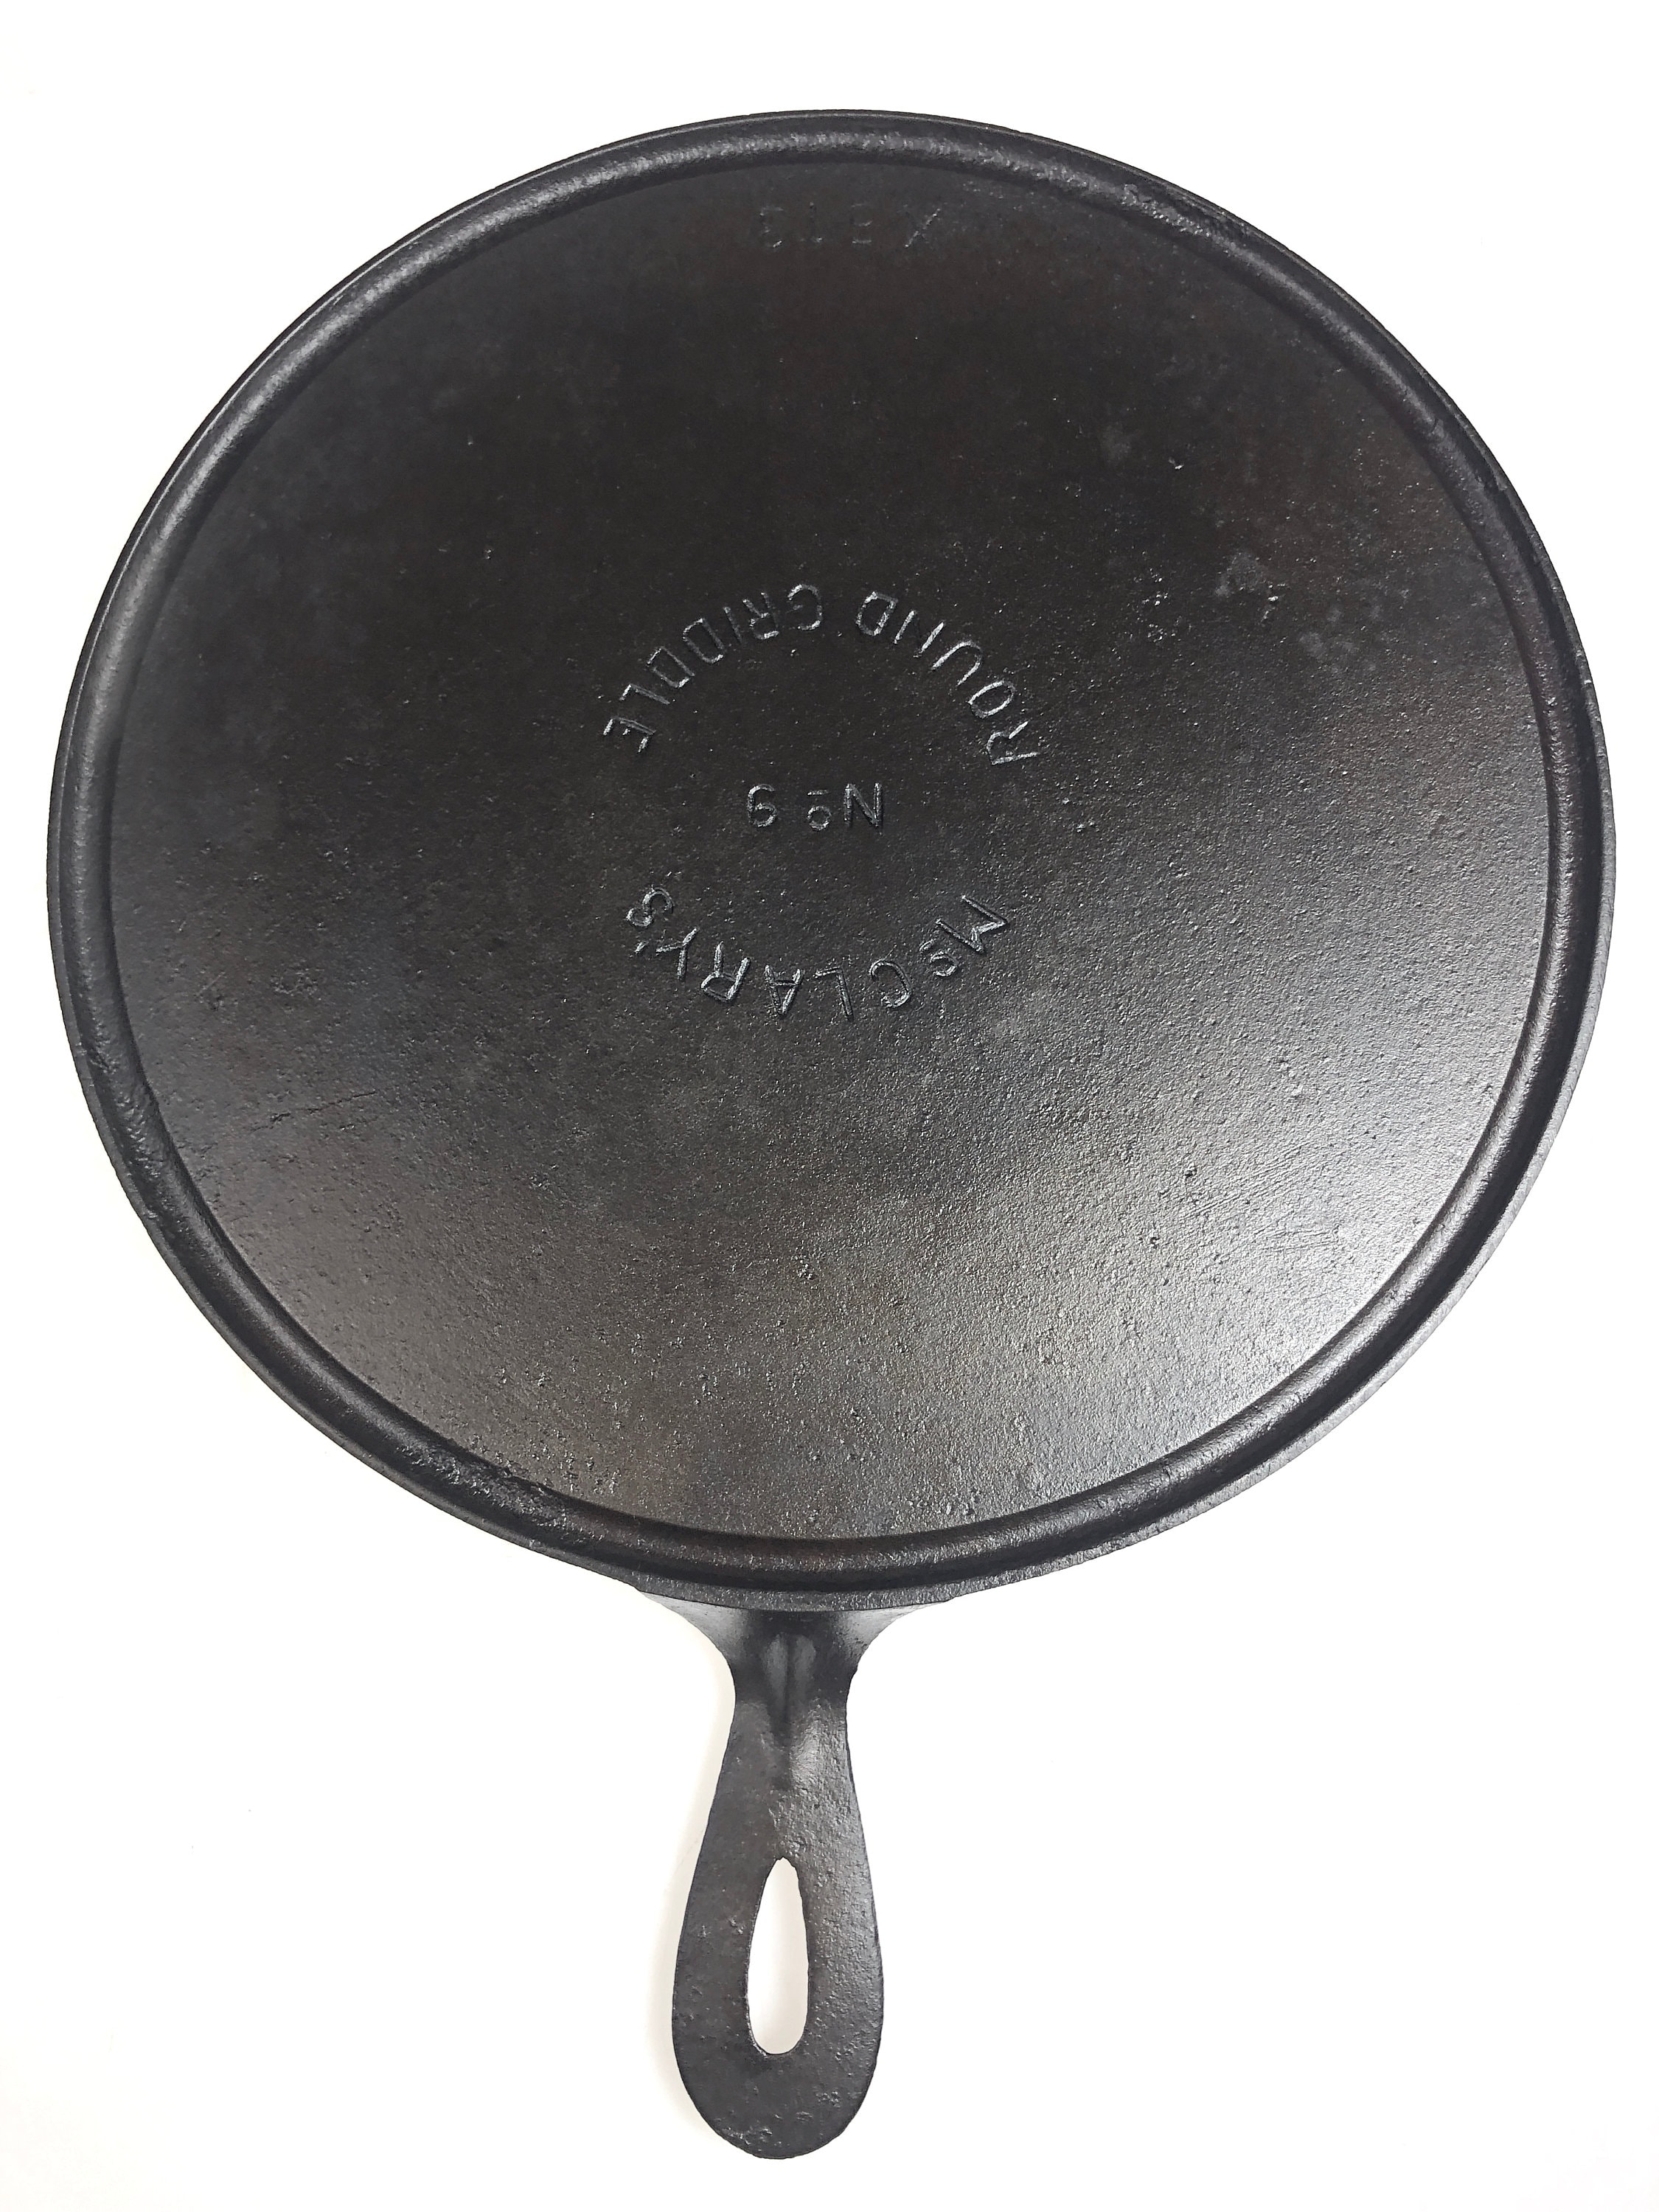 Round the Chuckbox: Large cast iron skillets revisited